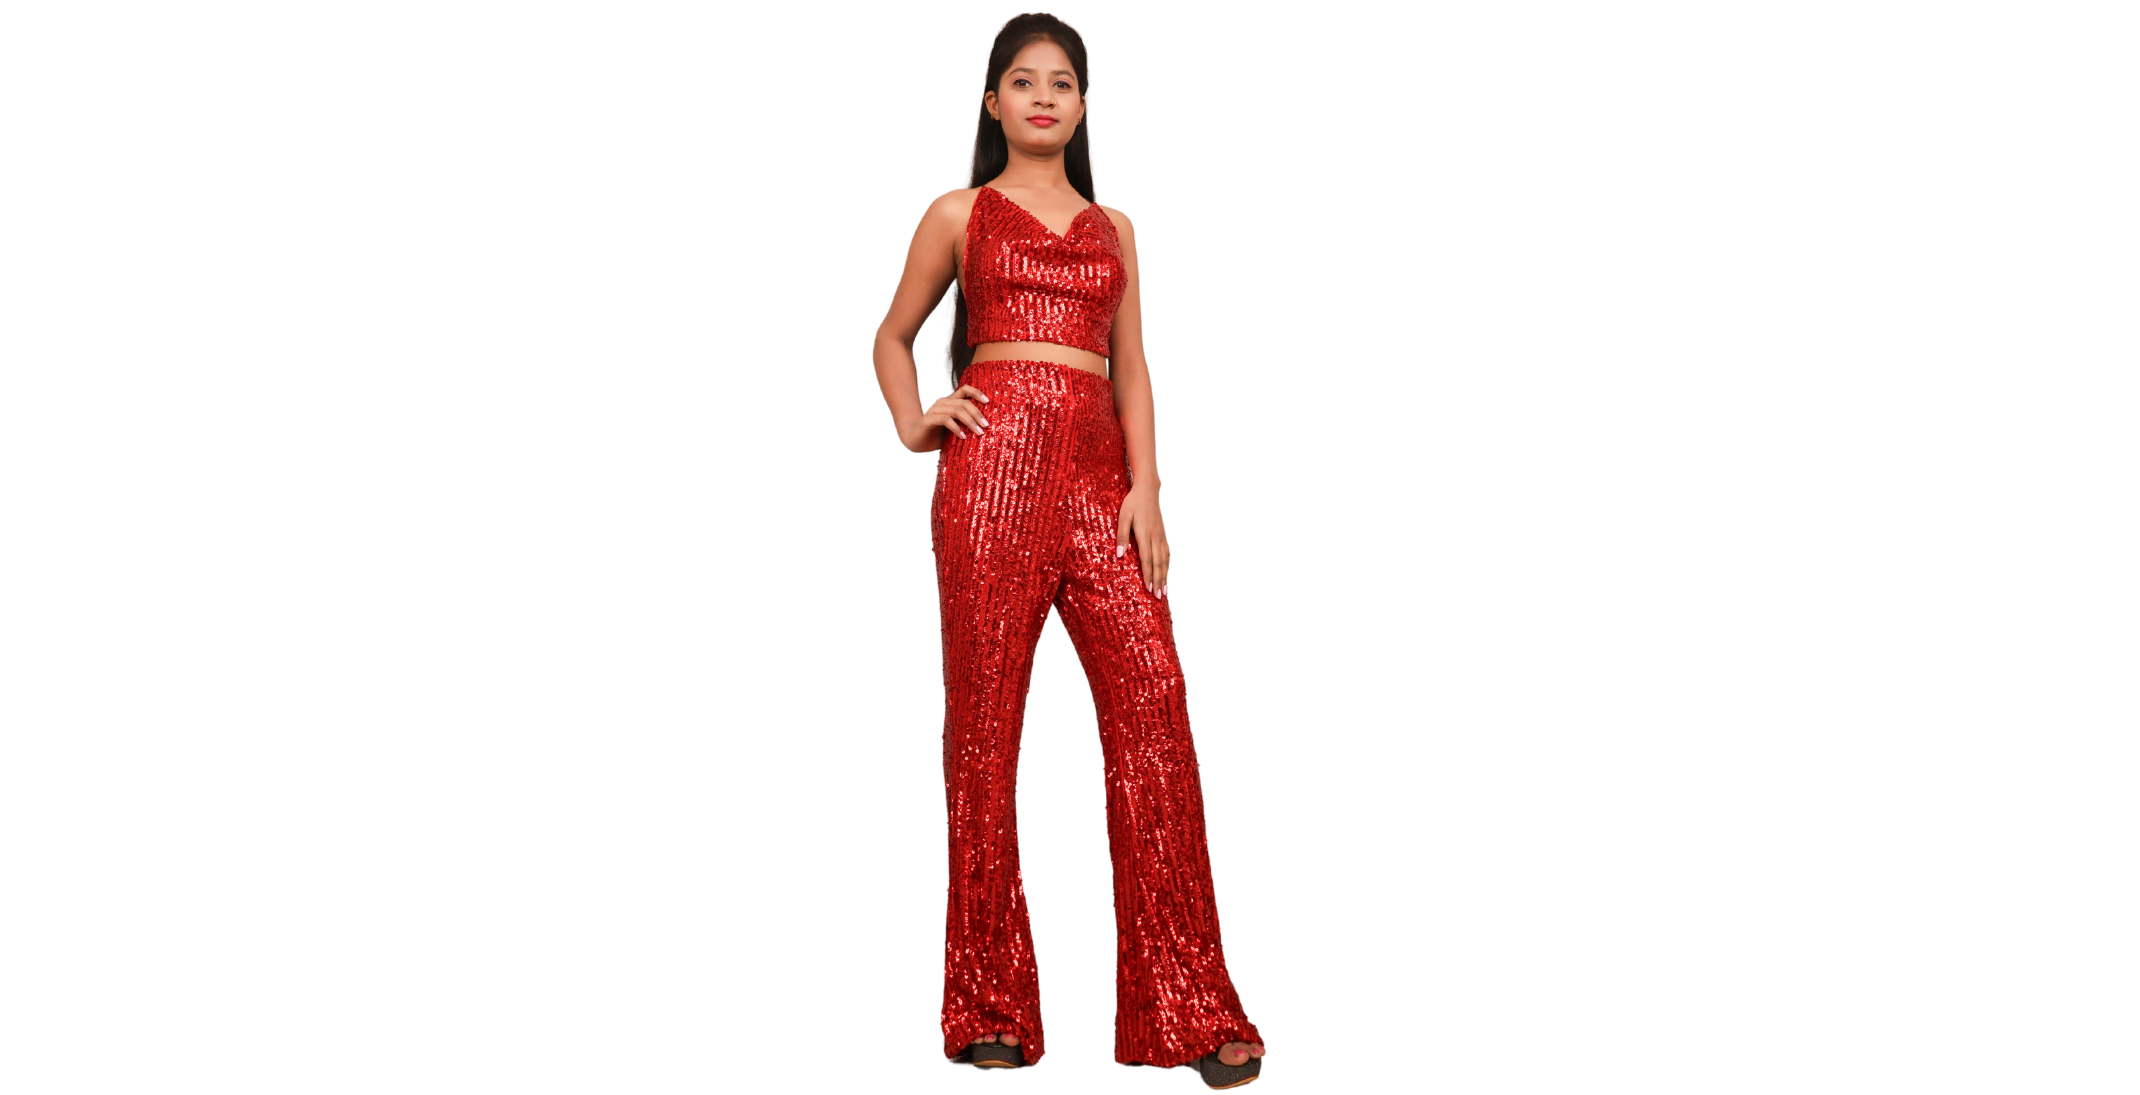 shreekama-western-wear-party-dress-new-years-eve-sparkle-outfit-ideas-for-a-glamorous-countdown